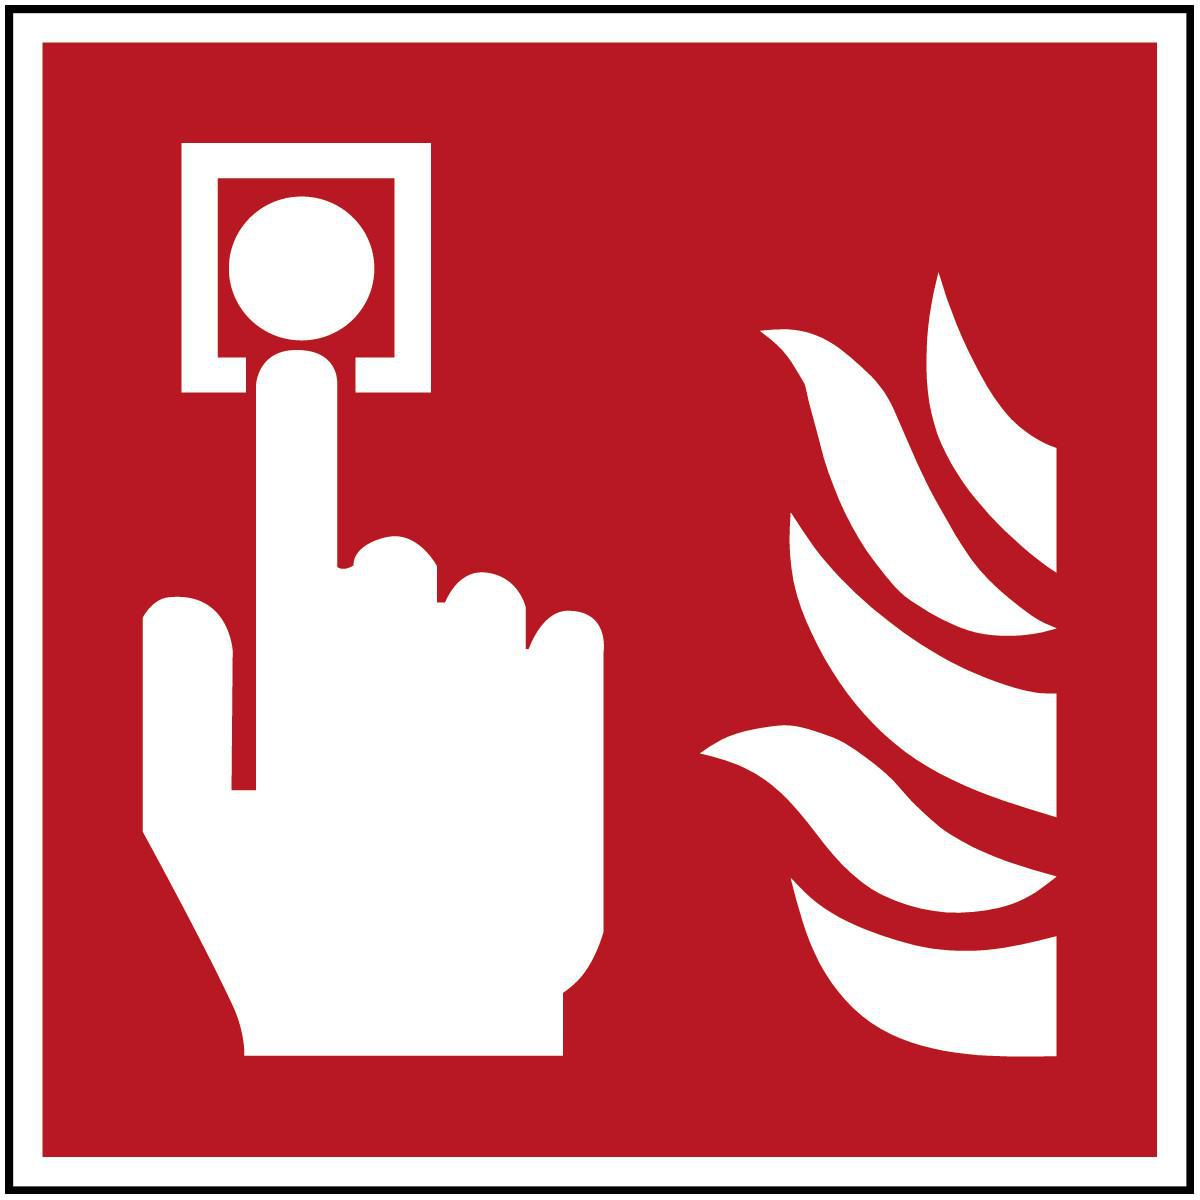 Brady PIC F005-400X400-PP-CRD1 W128397691 ISO Safety Sign - Fire alarm 